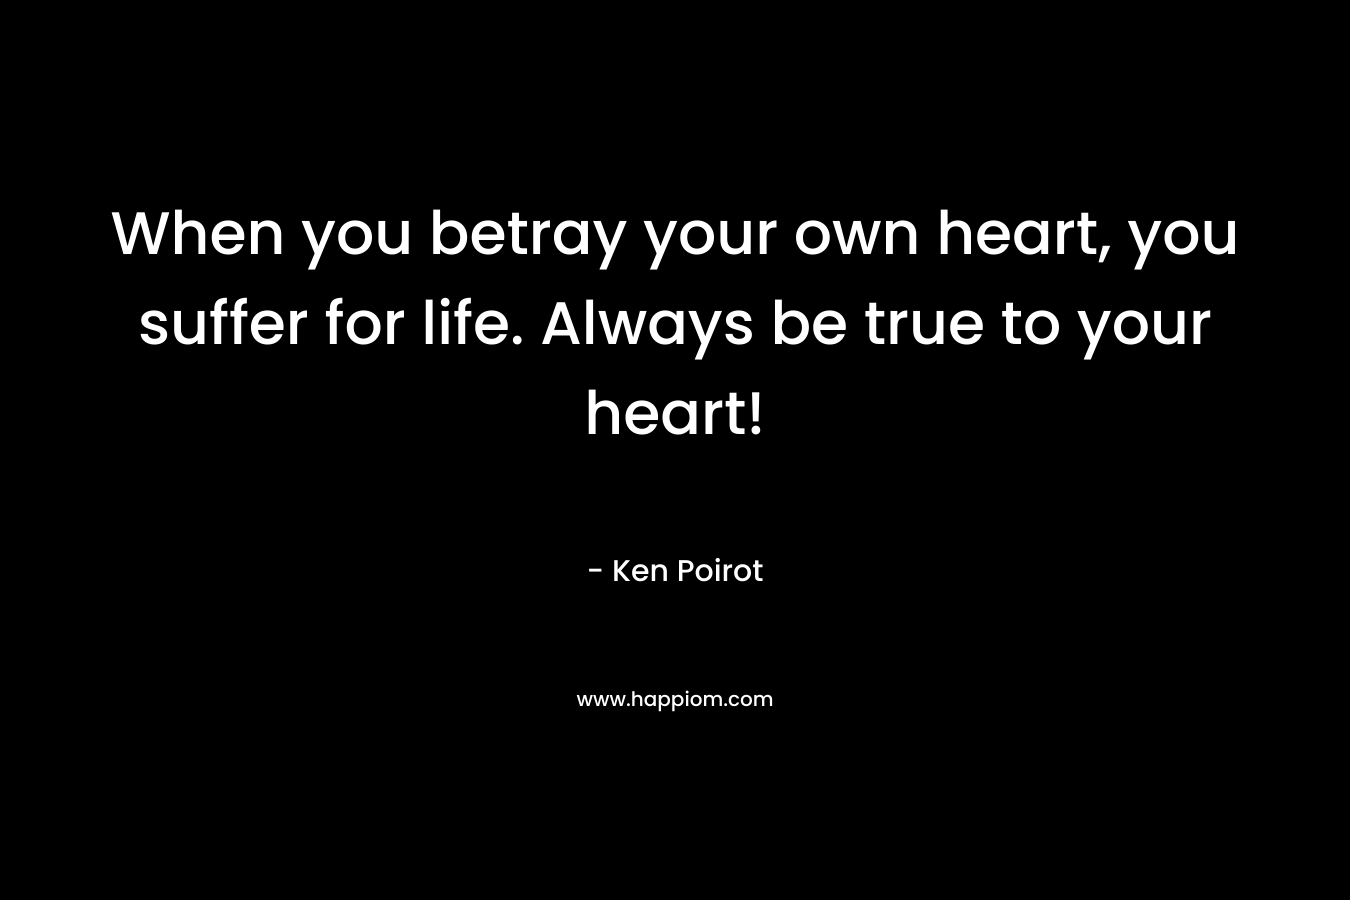 When you betray your own heart, you suffer for life. Always be true to your heart!